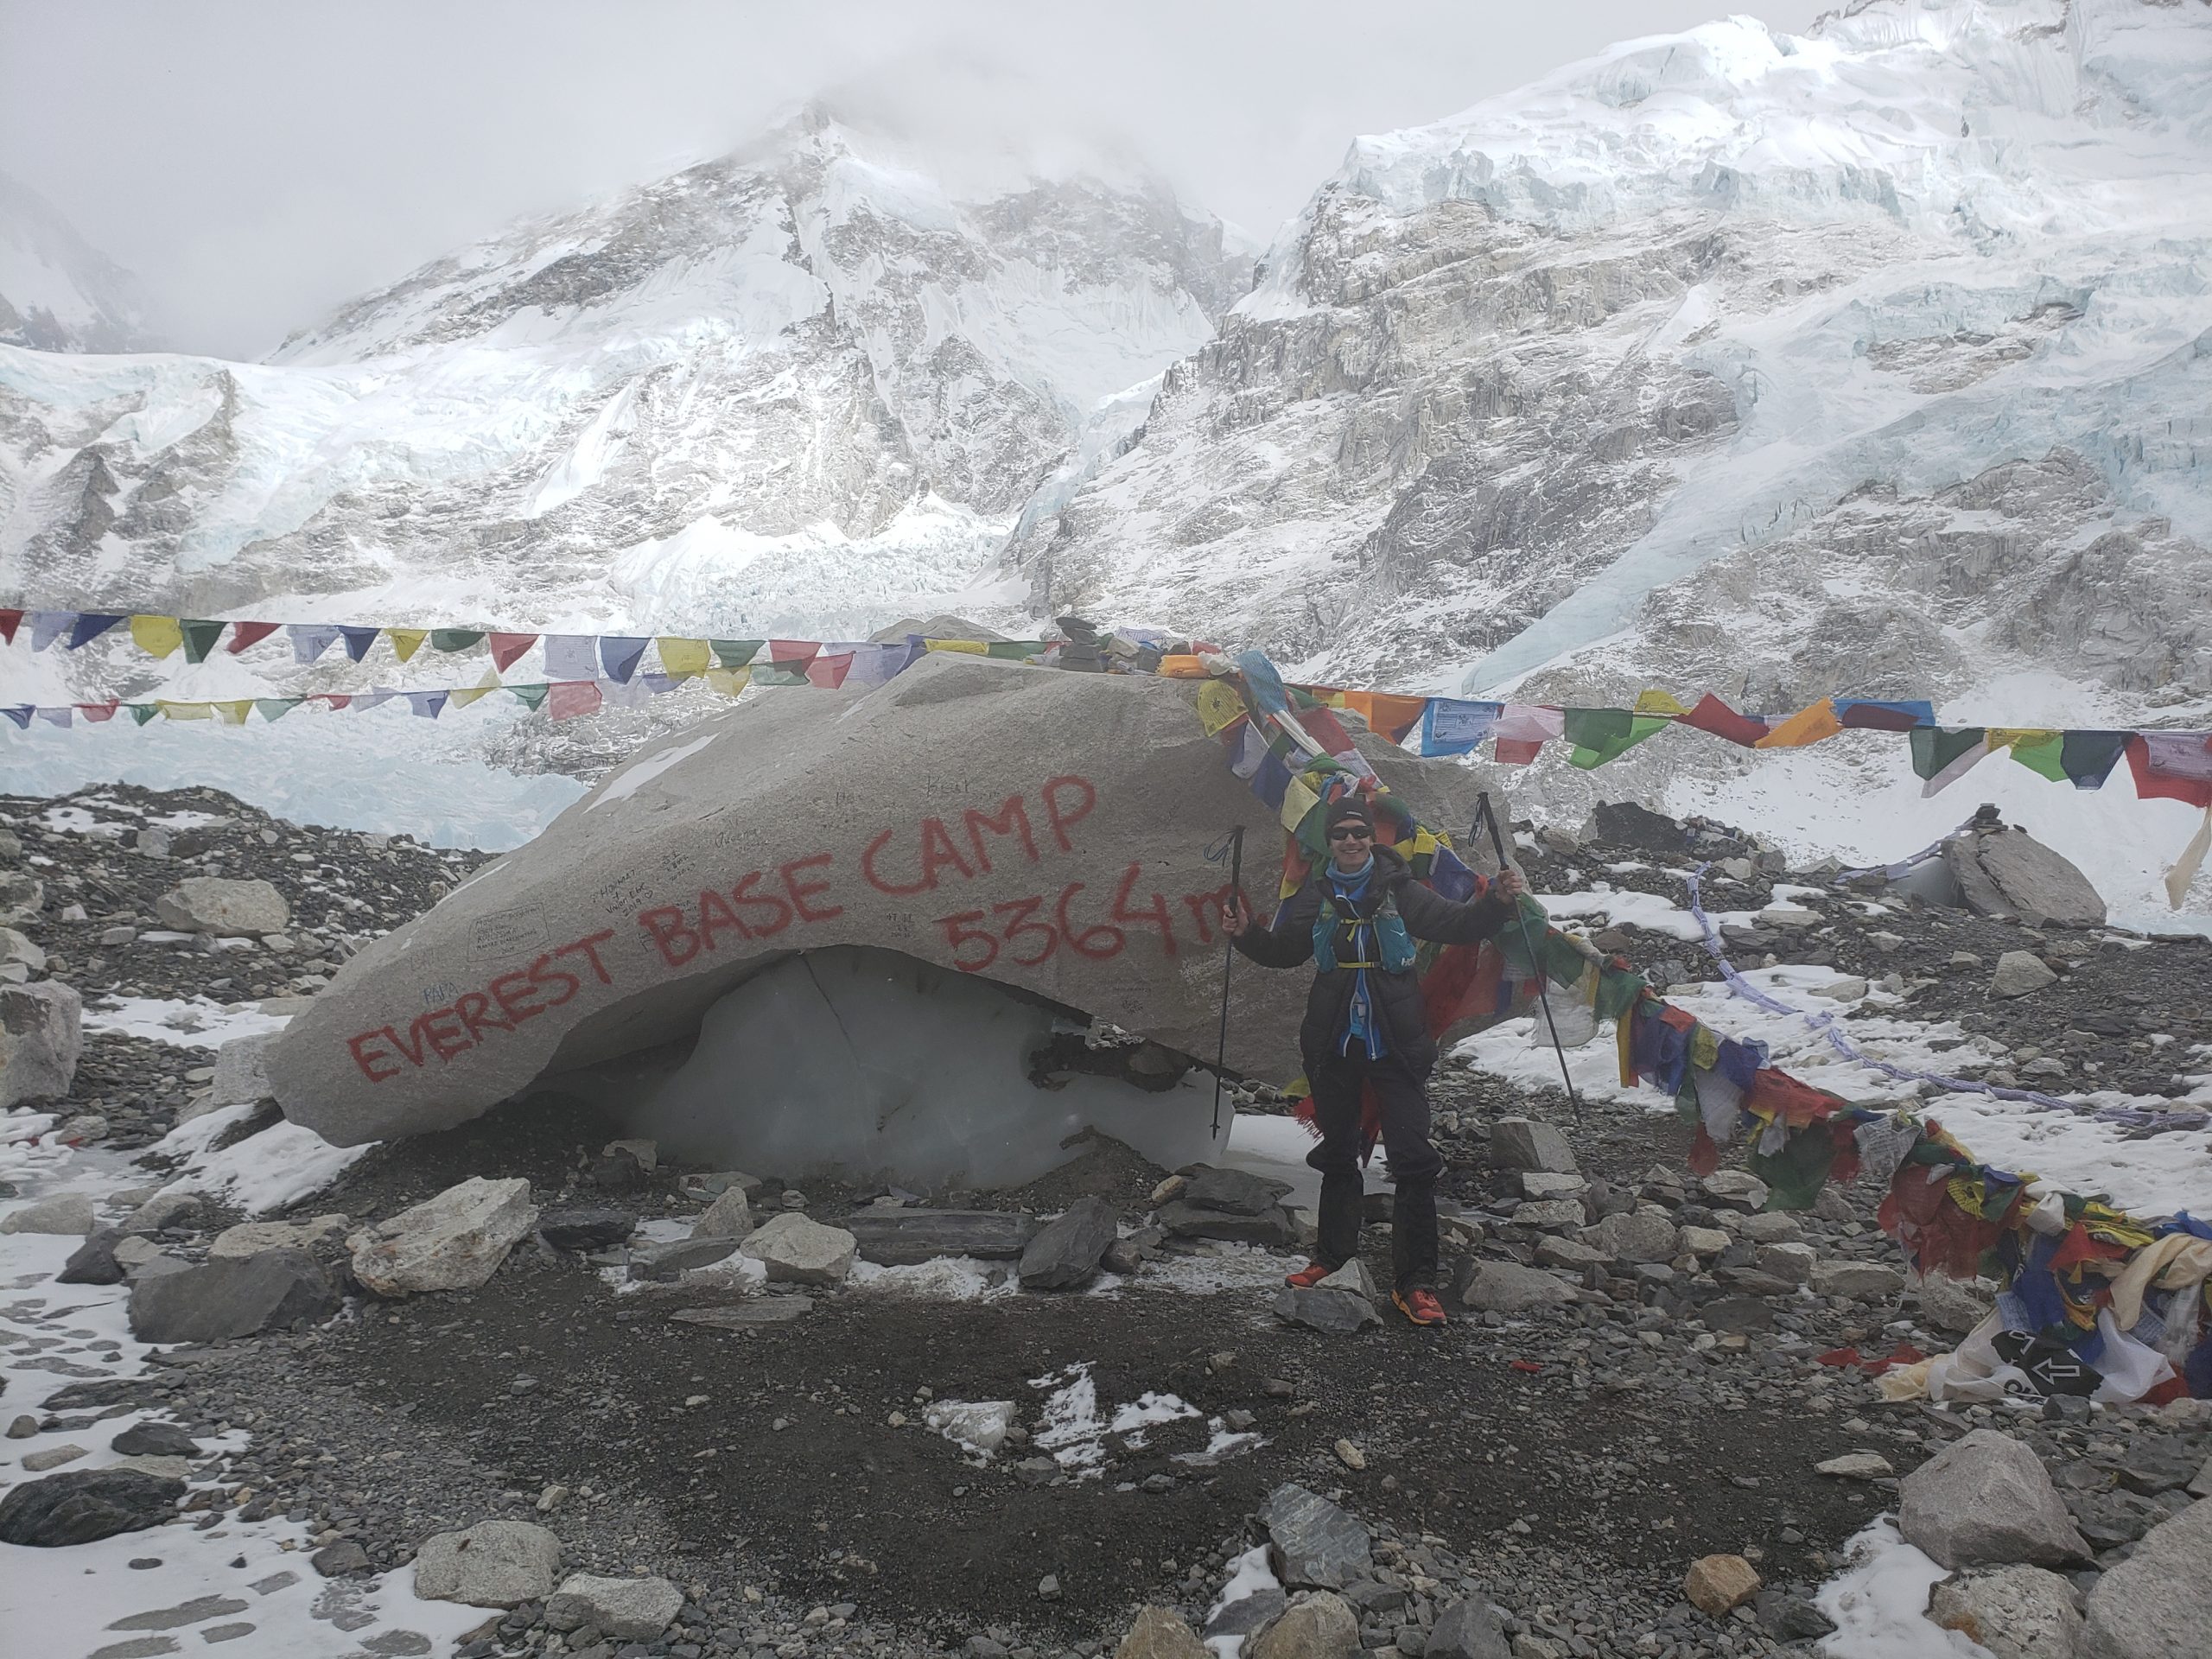 Moving Everest base camp would be ridiculous, says record holder